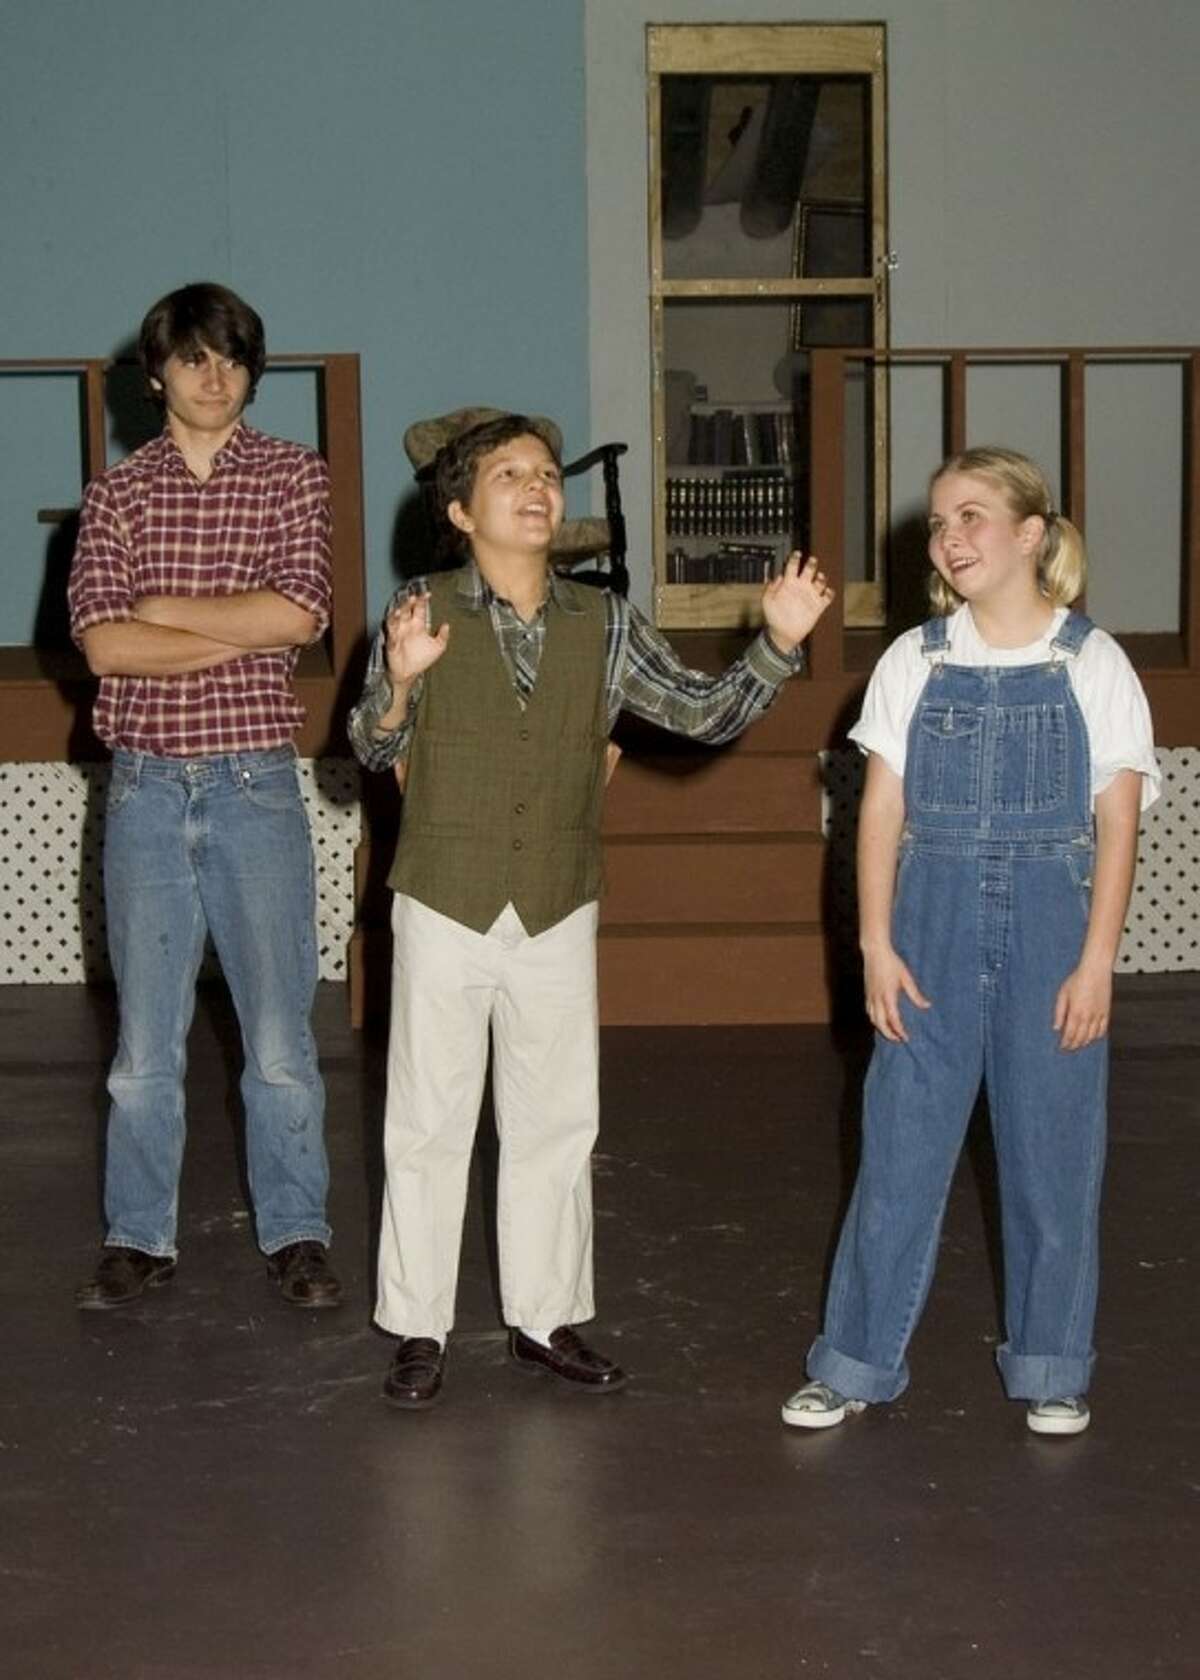 Anthony Martino, Lorenz Lopez, and Elizabeth Tyska appear as Jem, Dill, and Scout in To Kill a Mockingbird by Christopher Sergel based on the novel by Harper Lee at Pasadena Little Theatre, 4318 Allen Genoa Road. Opening night is Friday, June 17, with performances weekends through July 3. Show times are 8PM on Fridays, Saturday, and Thursday, June 30, and 3PM on Sundays. Ticket prices are 14.00 for adults and 12.00 for students and seniors. Make reservations by calling 713-941-1PLT (1758) or on line at pasadenalittletheatre.org.